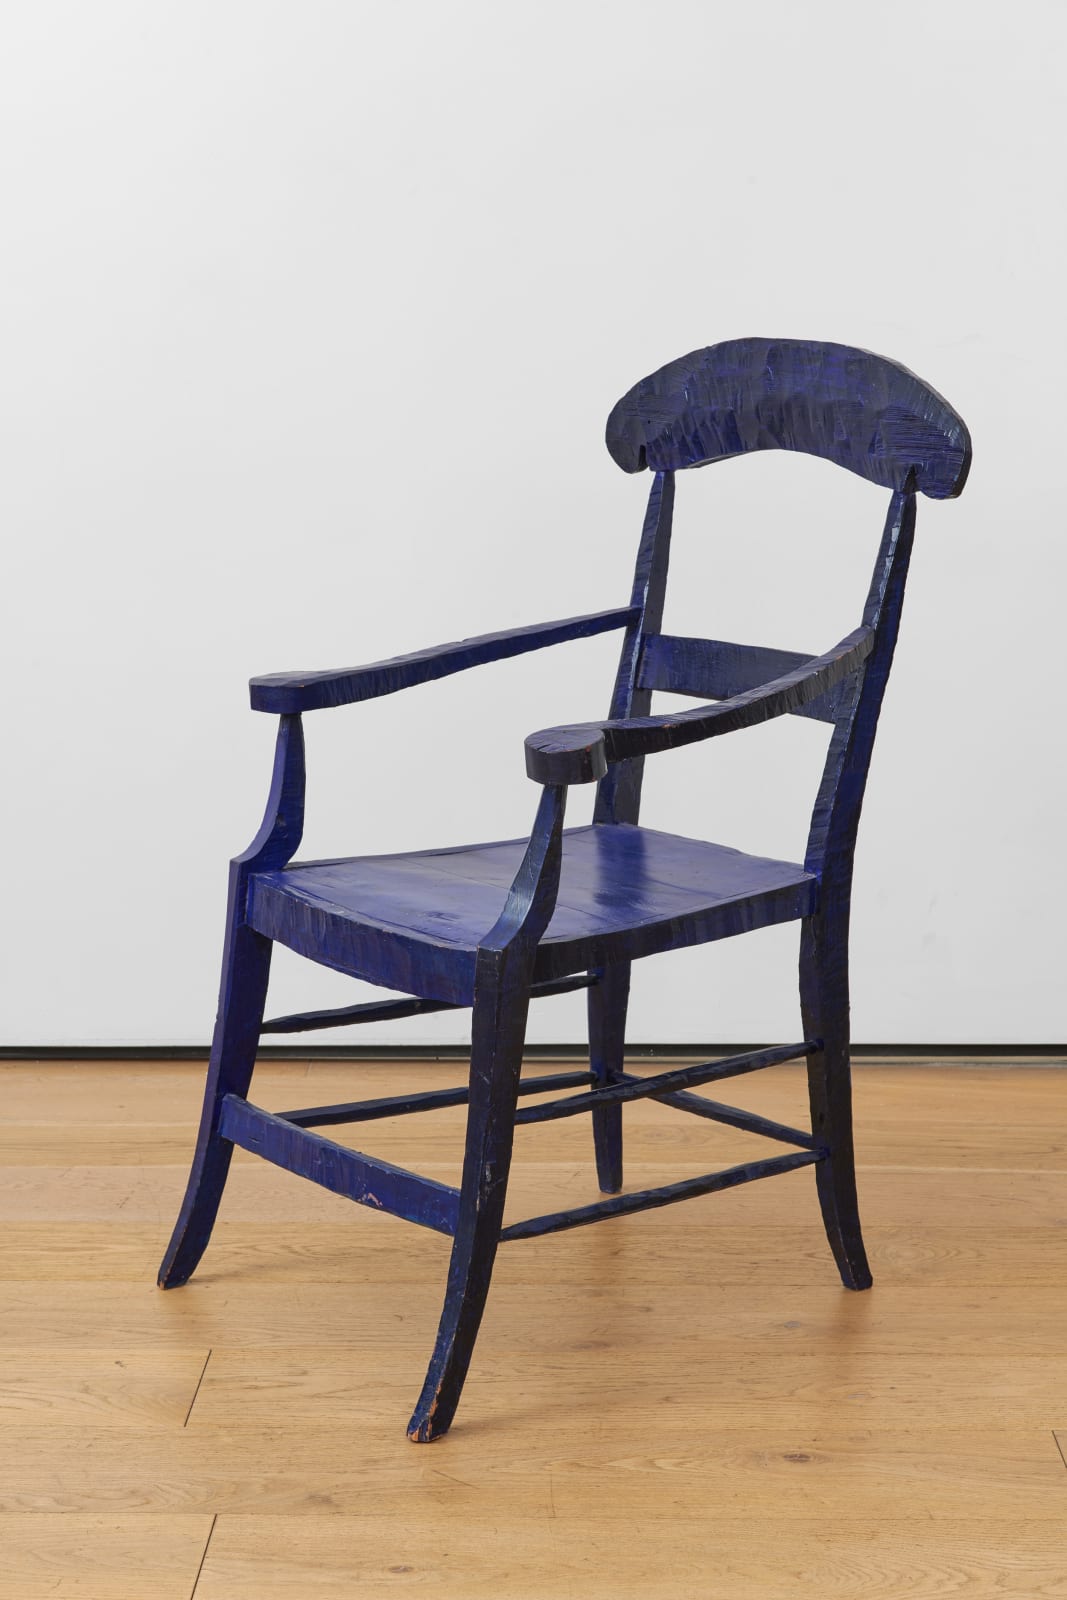 Gauguin’s Chair, 1984 Titled and inscribed ‘BOB LAW 84’ painted carved wood, unique 99.5 x 54.5 x 63 cm. 39 1/8 x 21 1/2 x 24 3/4 in.